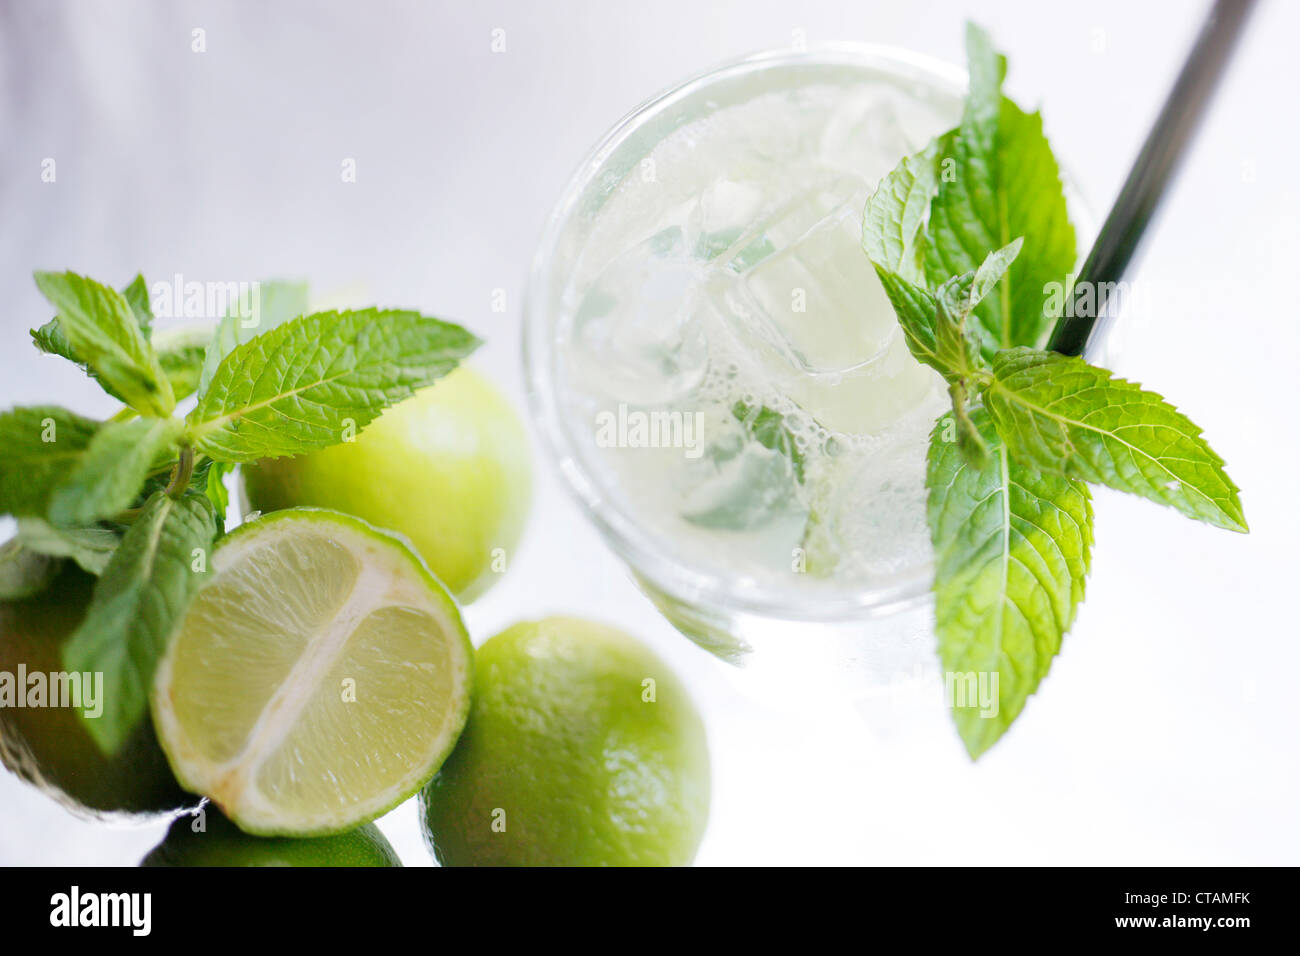 Caipirinha with limes and mint leaves, Cocktail, Alcoholic Drink Stock Photo